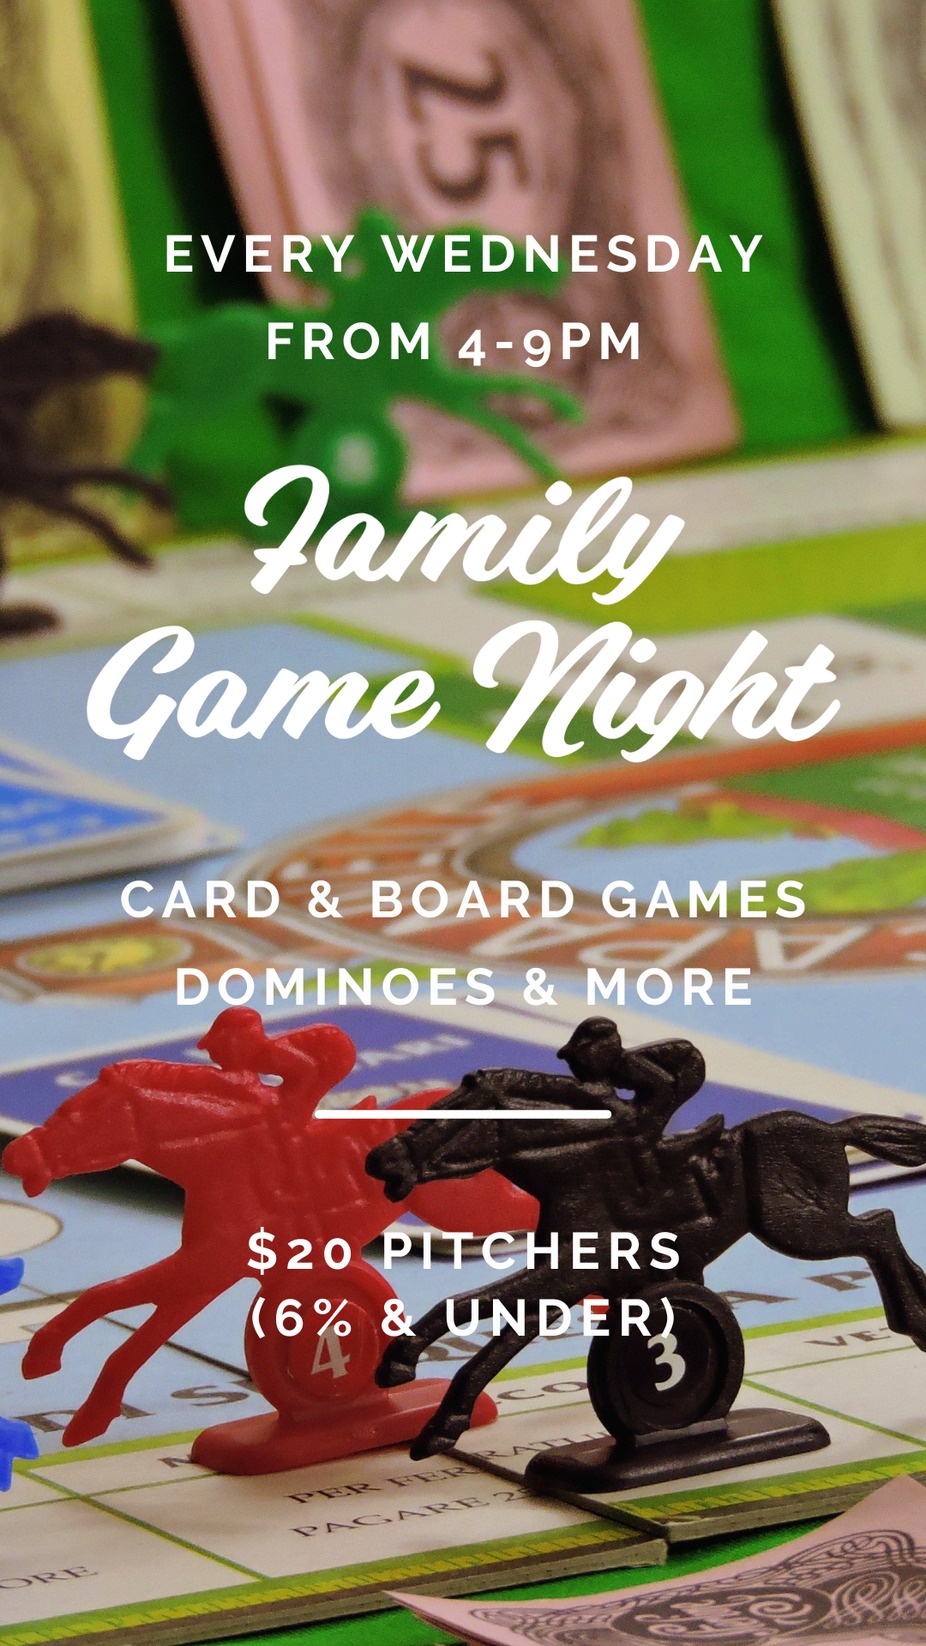 Family Game Night at Frontyard Brewing event photo